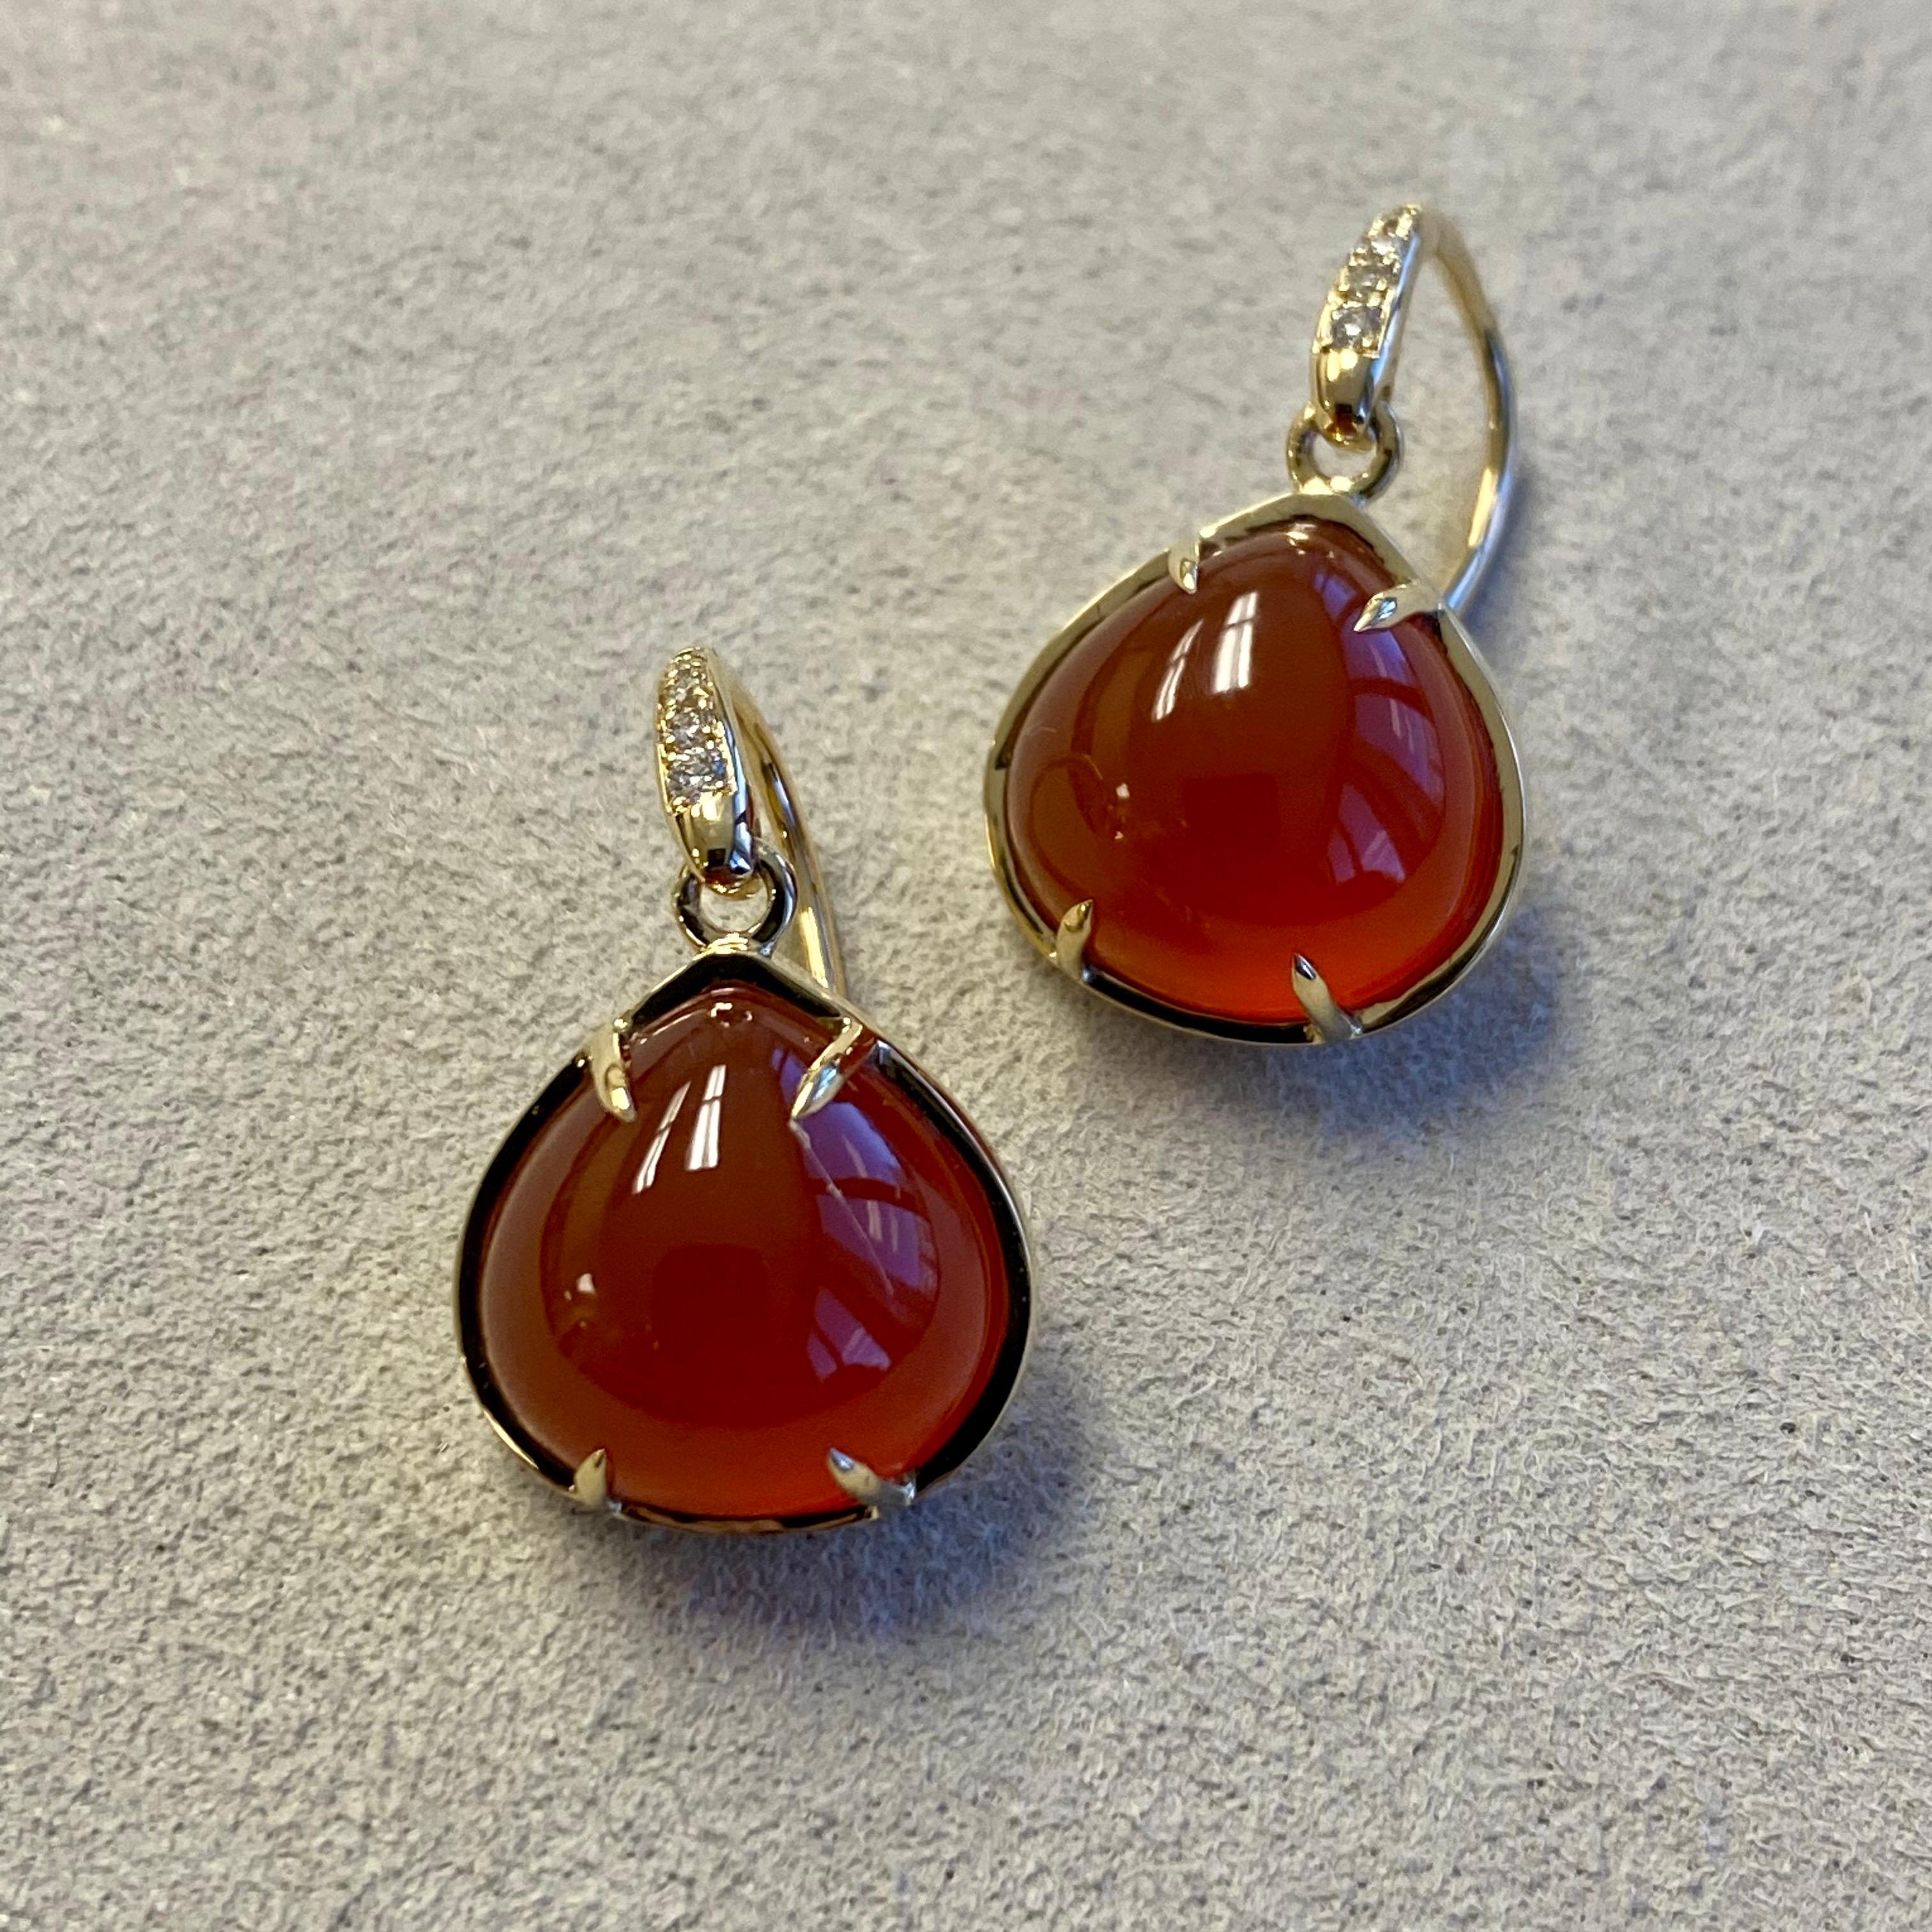 Created in 18kyg
Orange Chalcedony 11 carats approx.
Diamonds 0.05 carat approx.
Limited edition

Crafted from 18 karat yellow gold, this limited edition piece features approximately 11 carats of vibrant orange Chalcedony and a dazzling 0.05 carats